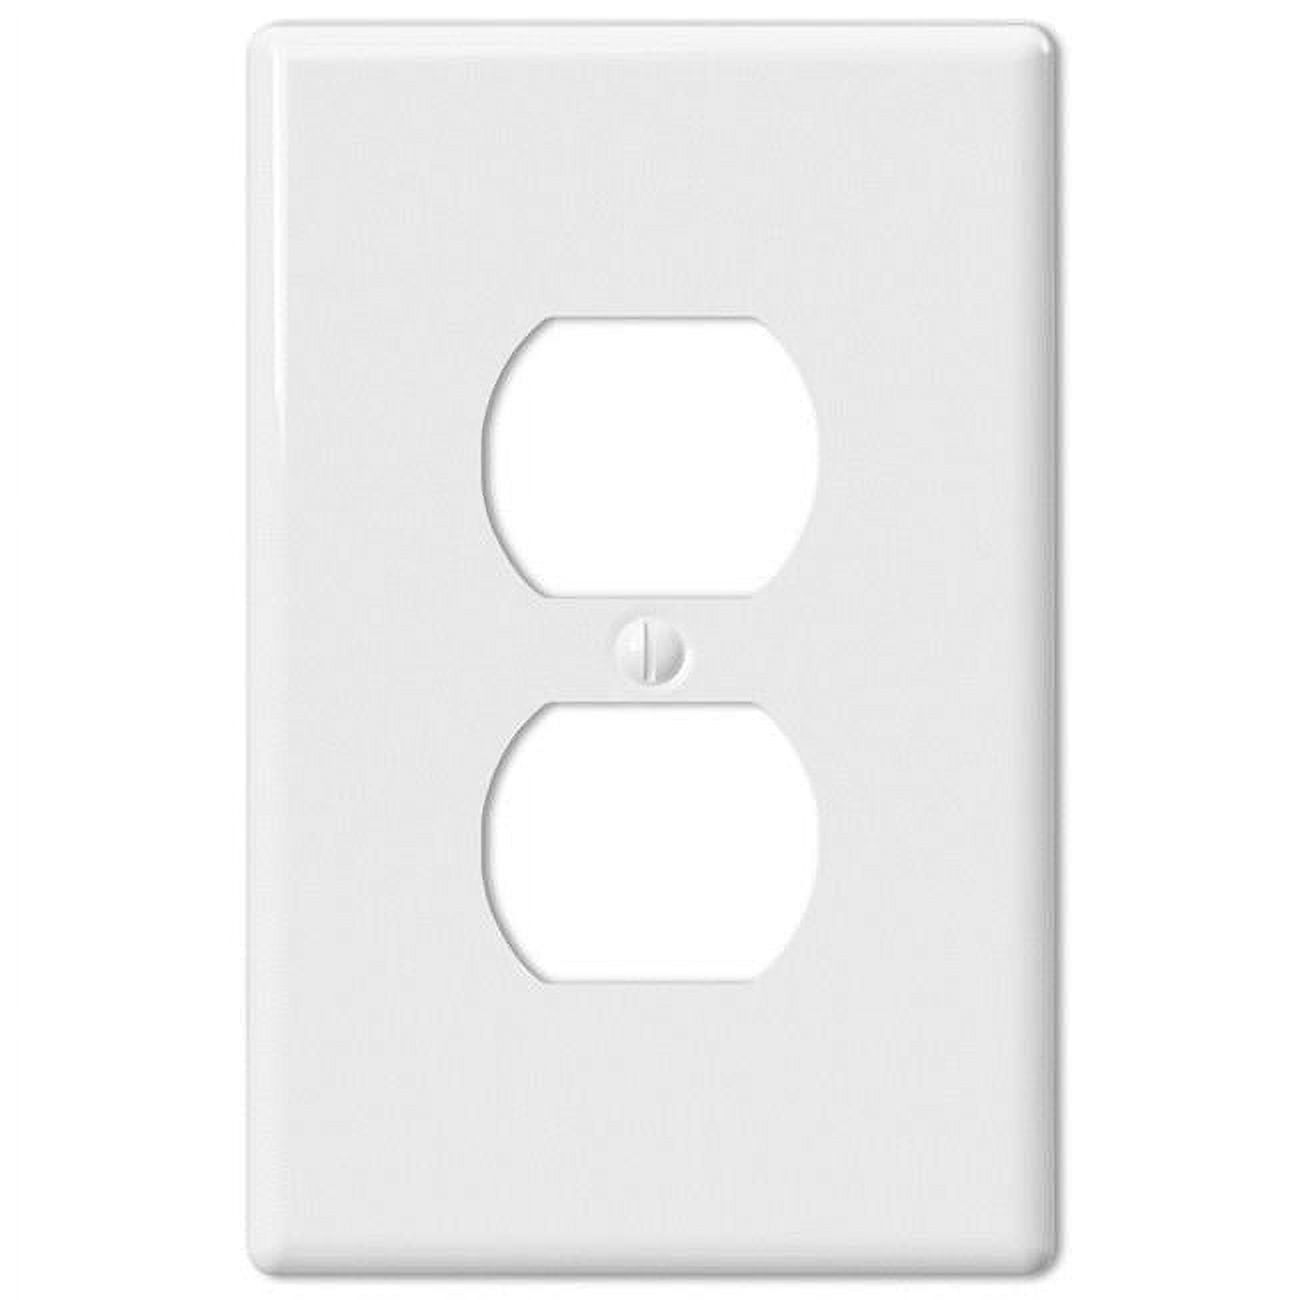 Picture of Amerelle 3003440 Metro White 1 Gang Ceramic Duplex Wall Plate